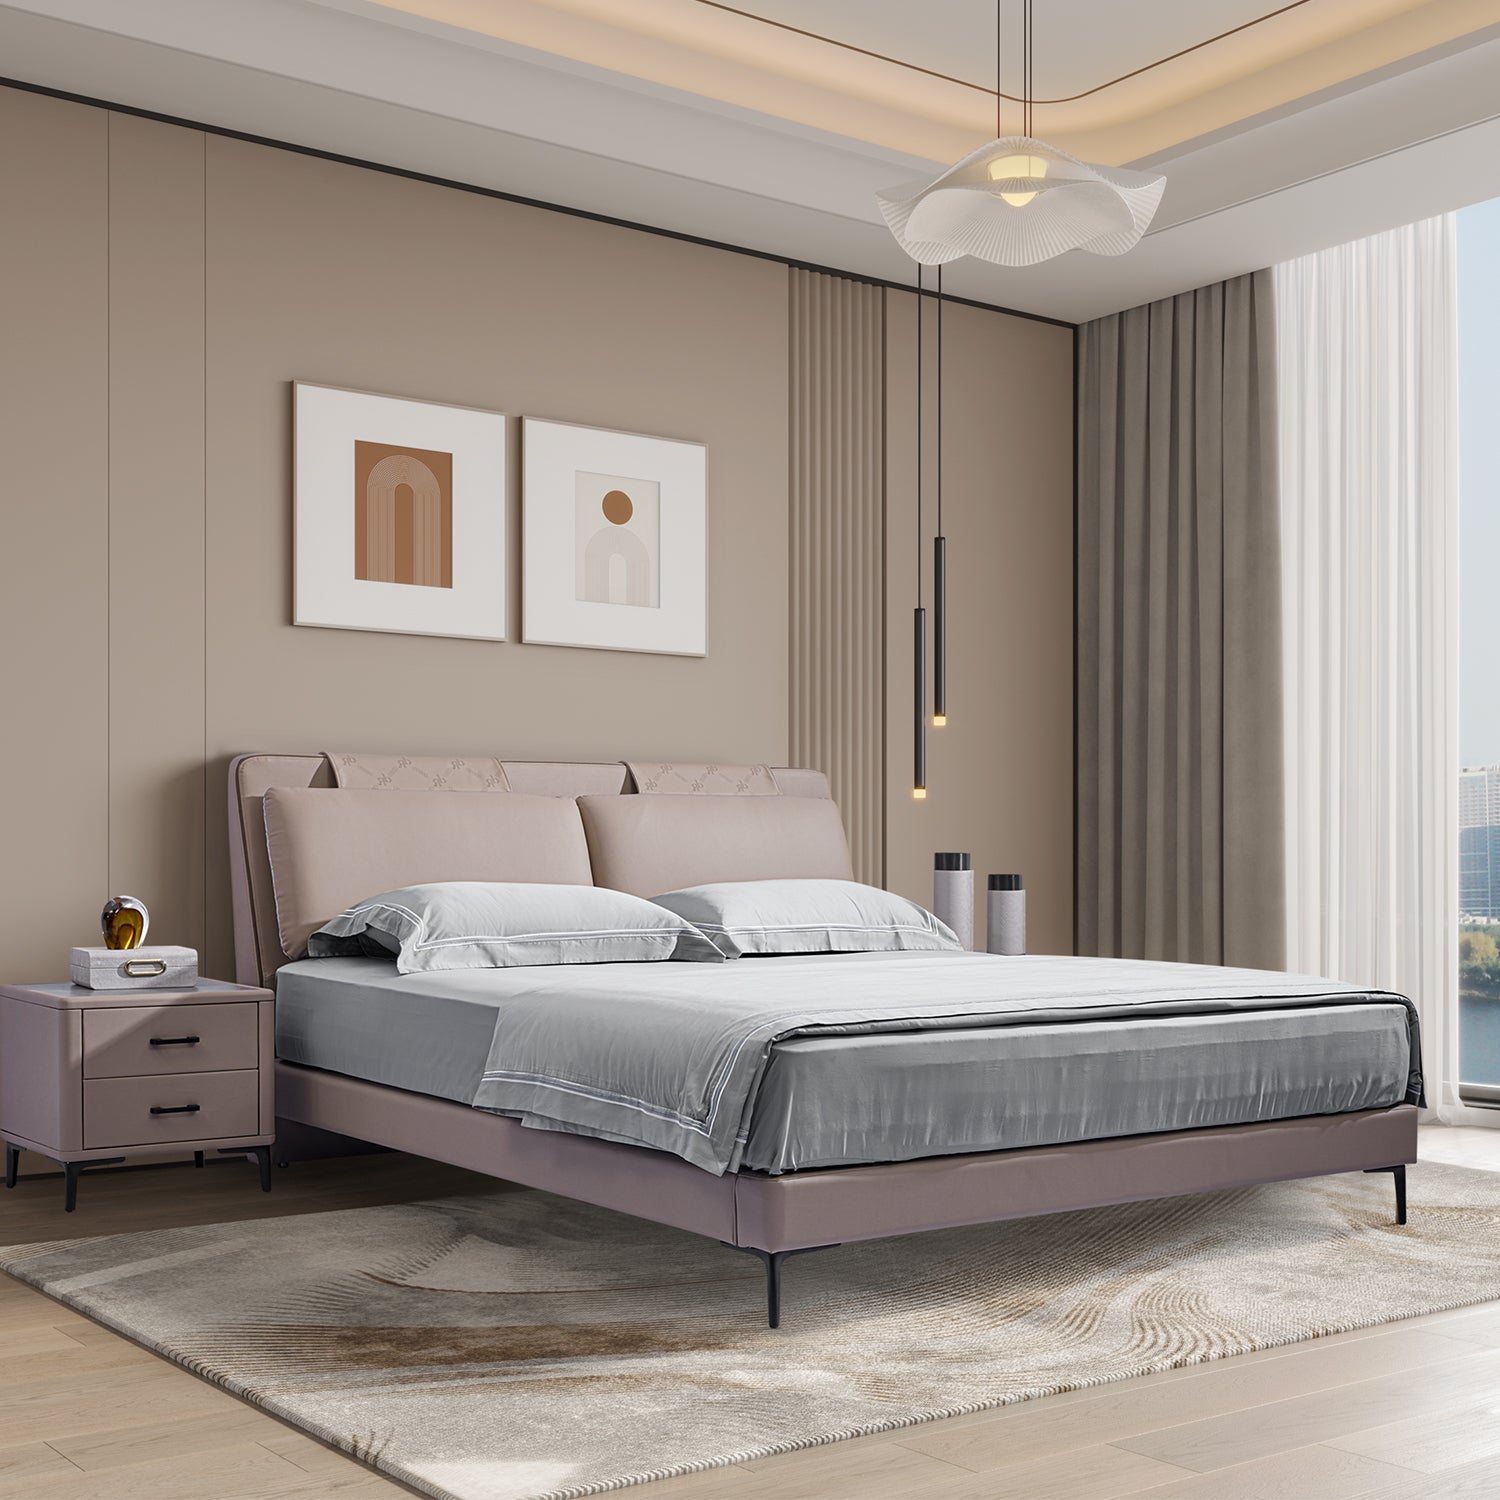 DeRUCCI Bed Frame BOC1 - 006 in a modern, minimalistic bedroom setting with abstract art, pendant lights, and a bedside table.